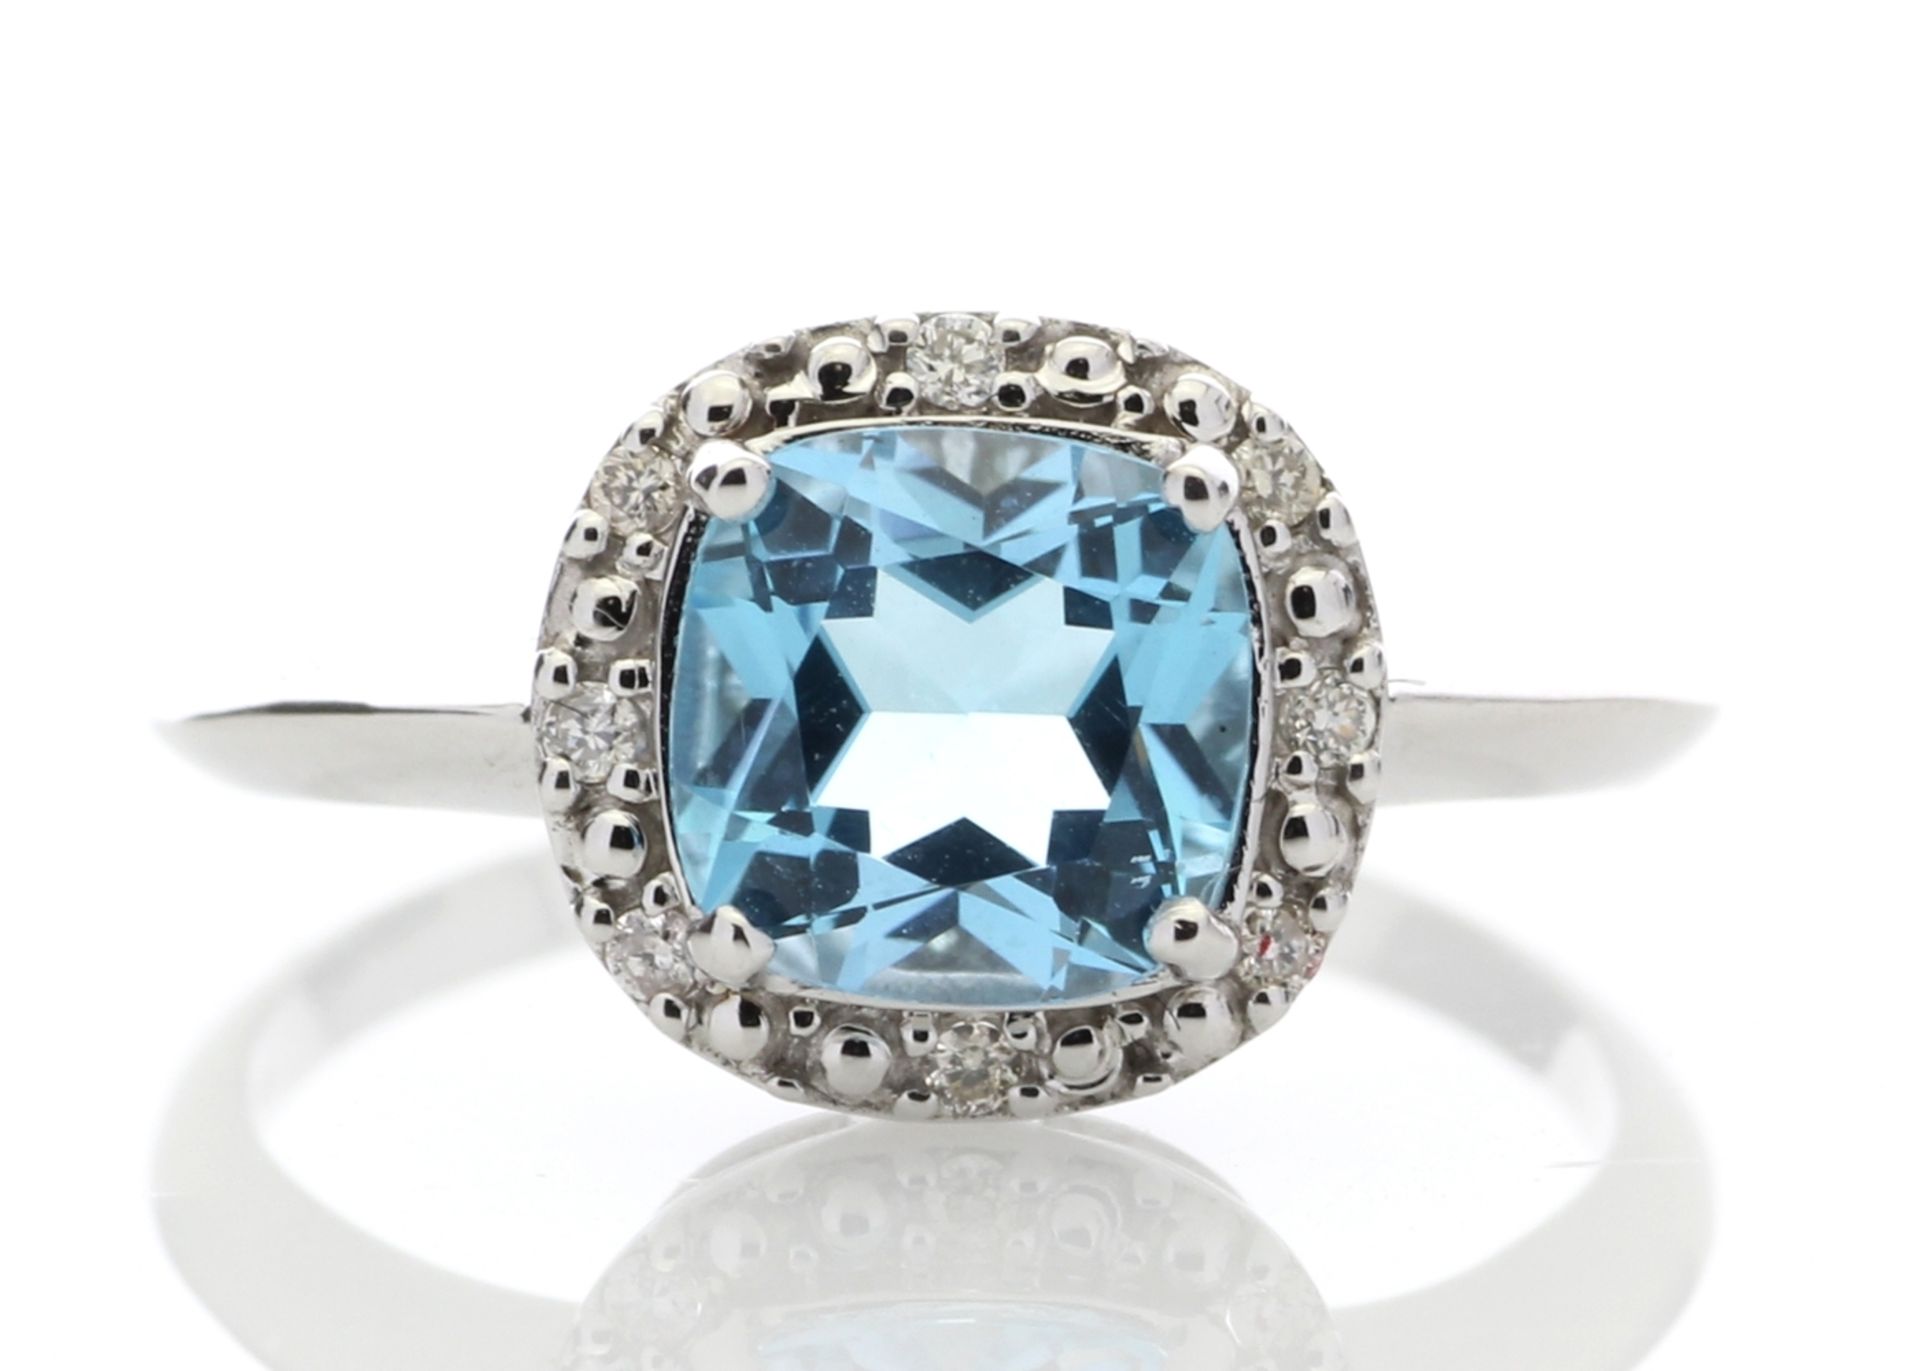 9ct White Gold Blue Topaz Diamond Ring 0.07 Carats - Valued by GIE £1,895.00 - 9ct White Gold Blue